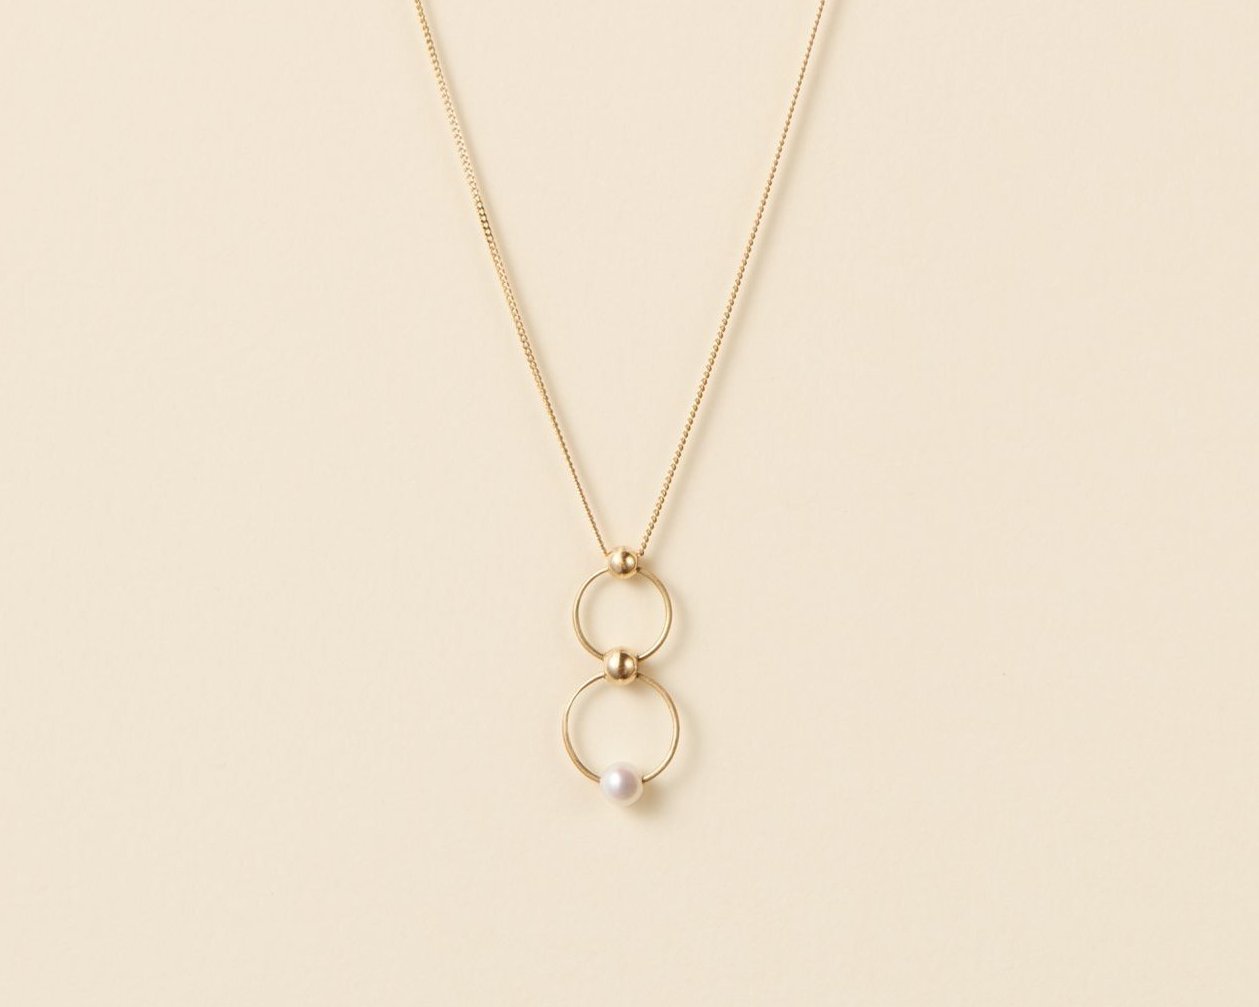 18KT gold necklace whit freshwater pearl - Callisto